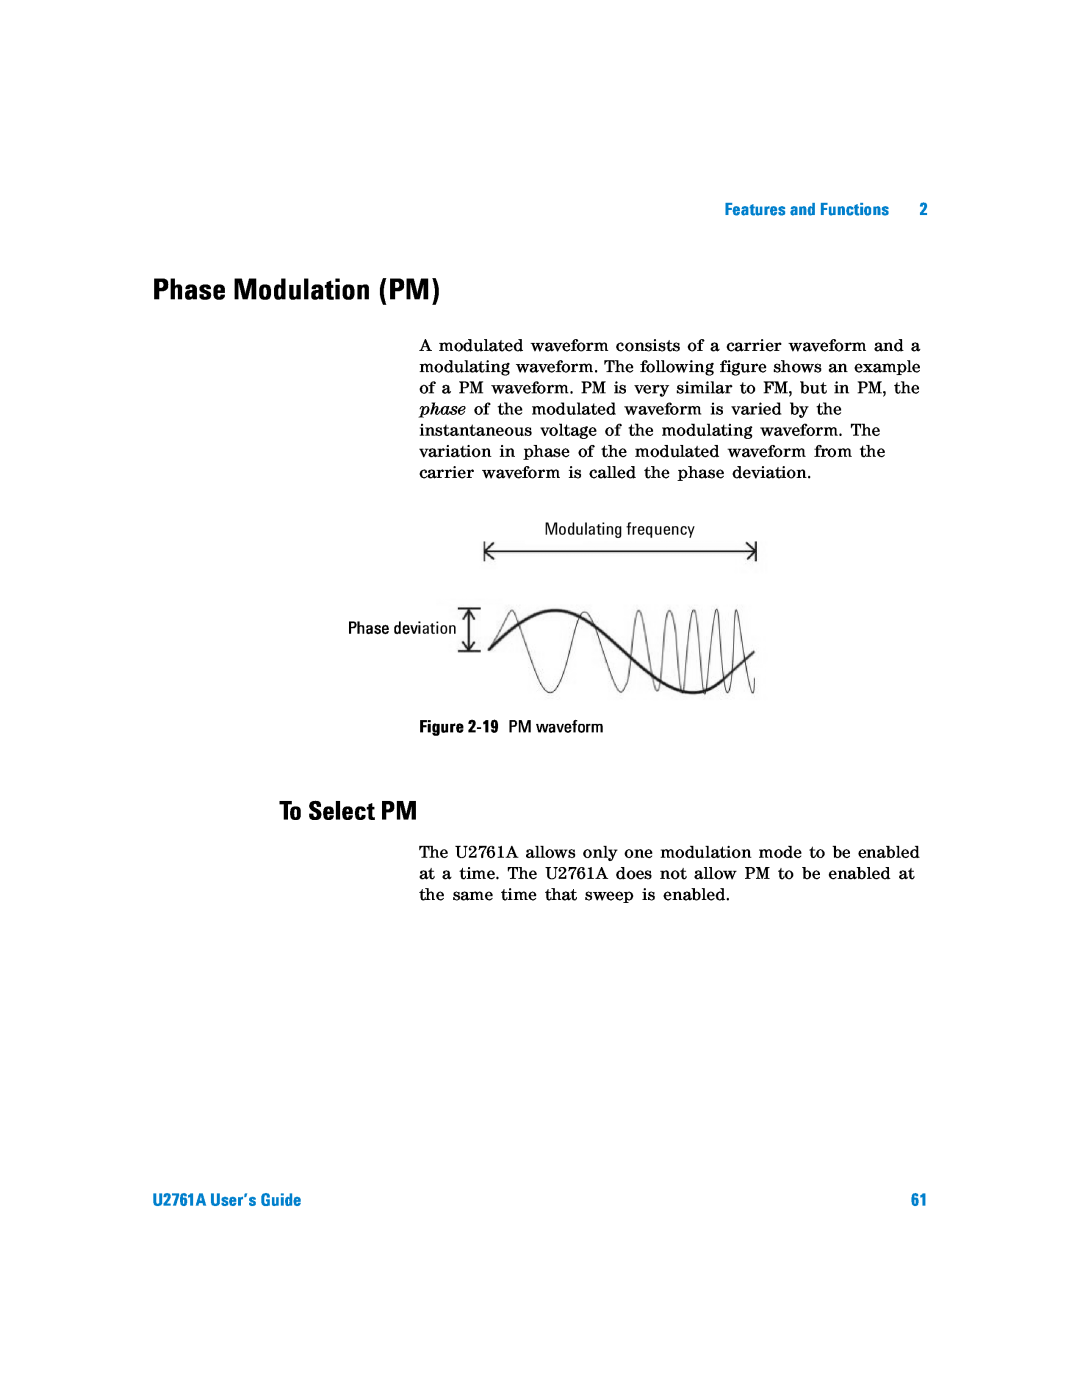 Agilent Technologies manual Phase Modulation PM, To Select PM, U2761A User’s Guide 